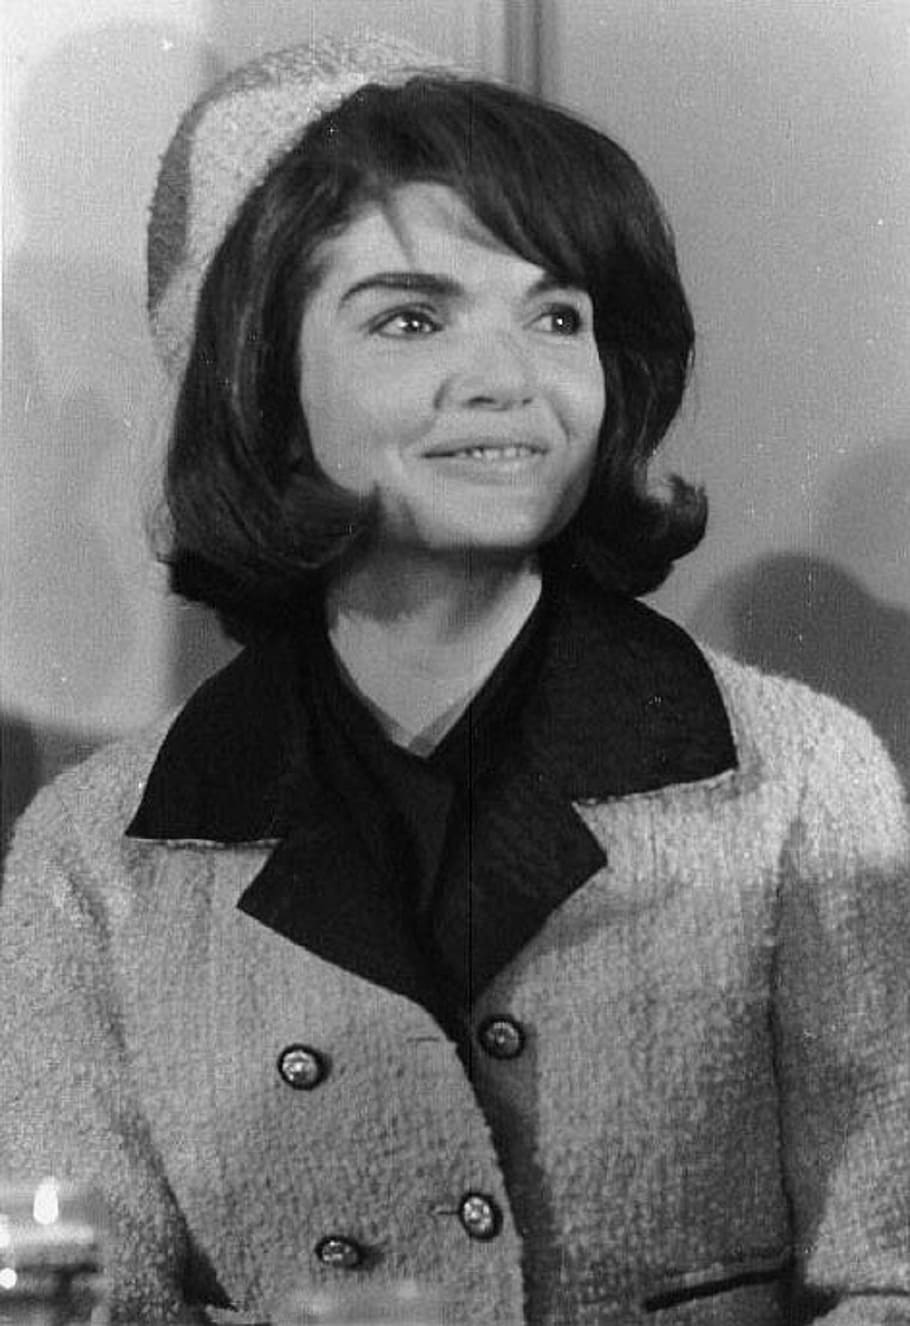 jacqueline kennedy, woman, person, official, first lady, portrait, john kennedy, jackie, monochrome, historical